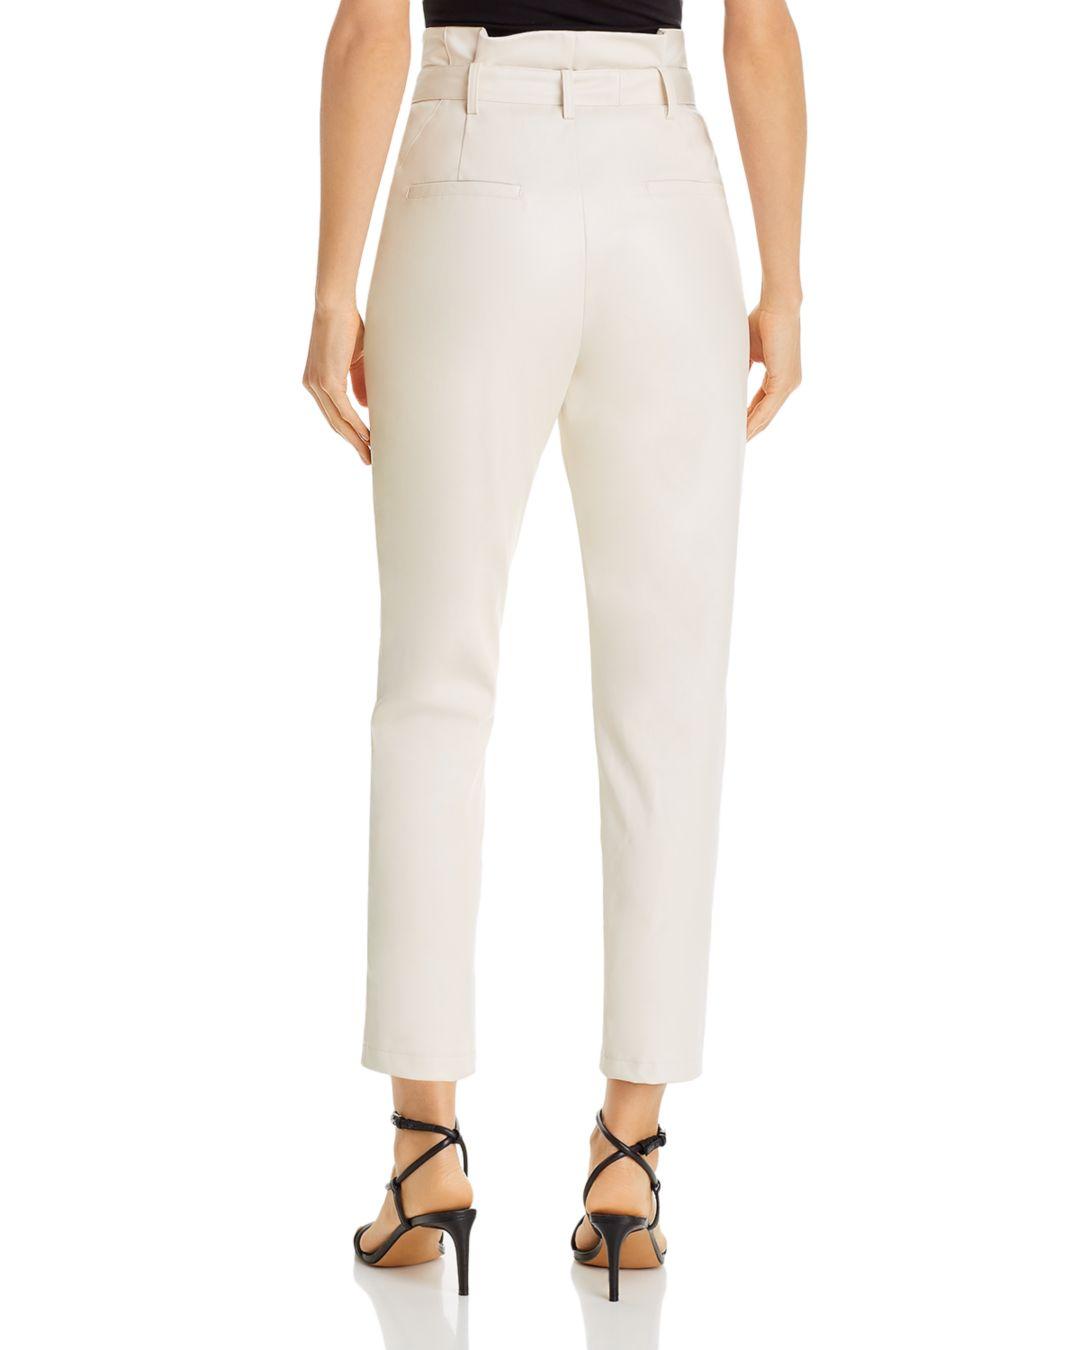 Lucy Paris Faux Leather Paperbag - Waist Pants in Ivory (White) - Lyst